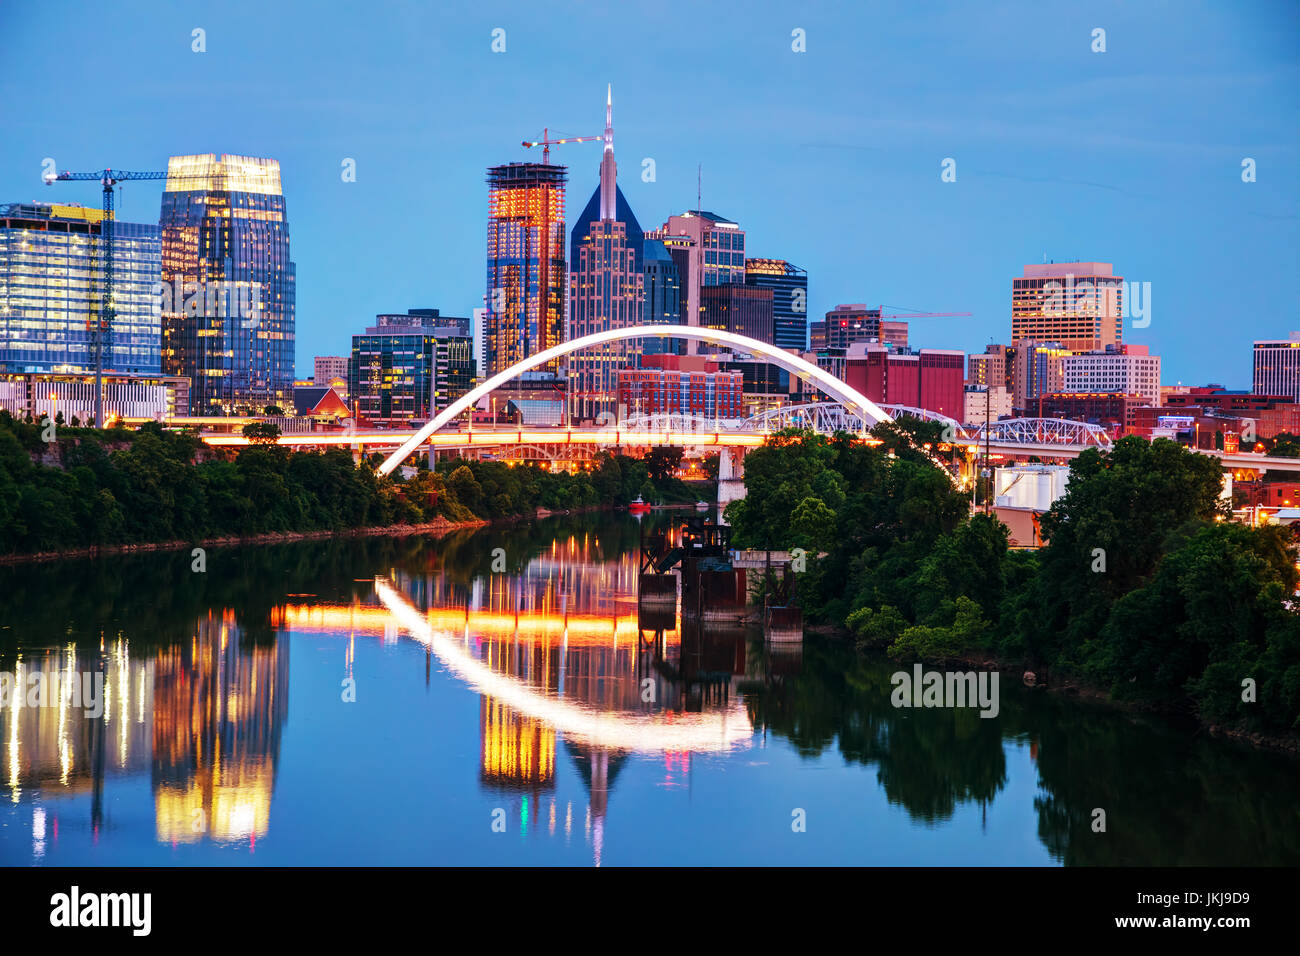 Downtown Nashville, Tennessee  cityscape at night Stock Photo